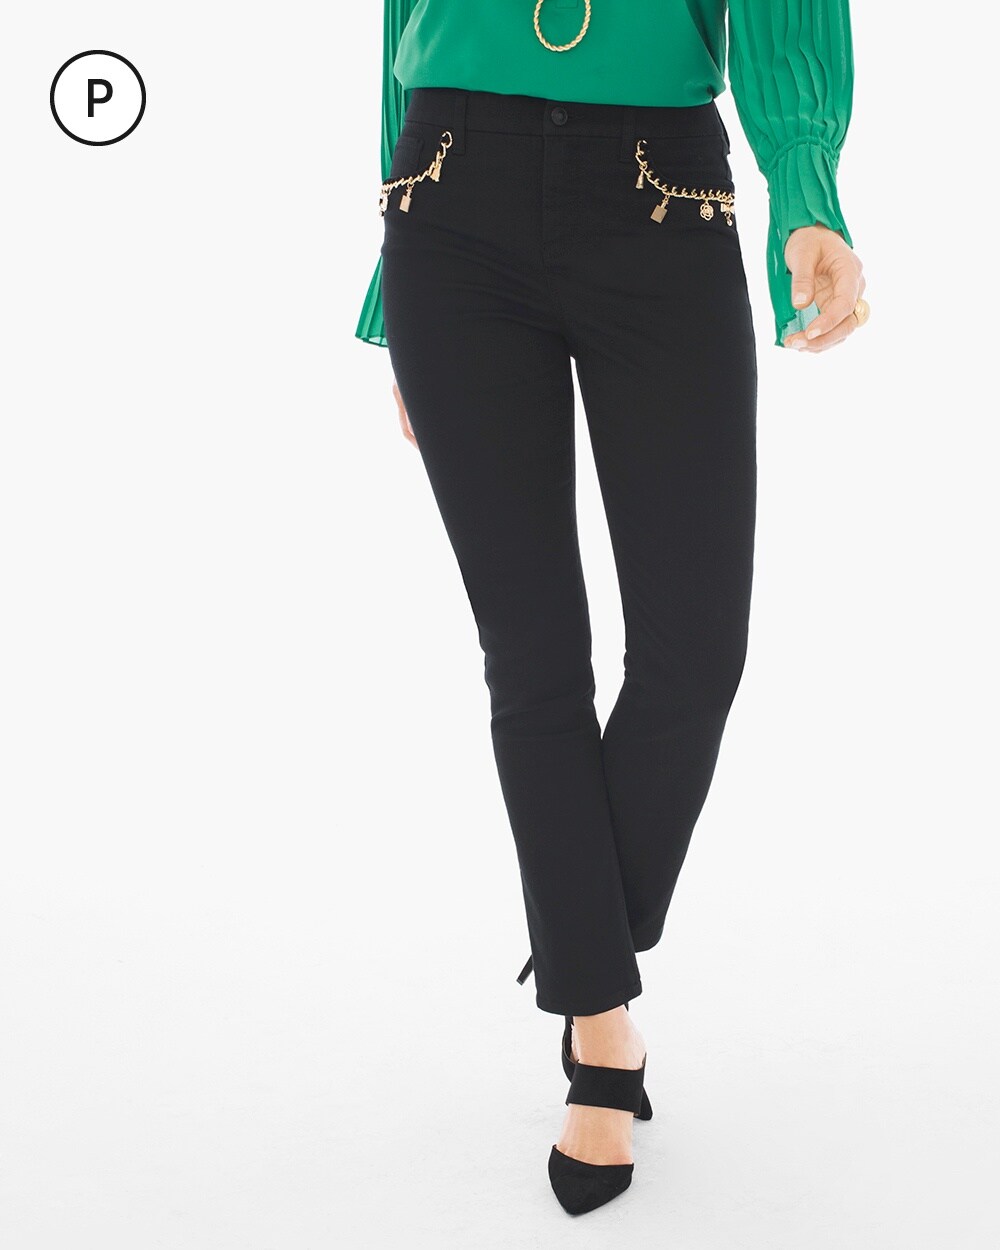 So Slimming Petite Charm Ankle Jeans